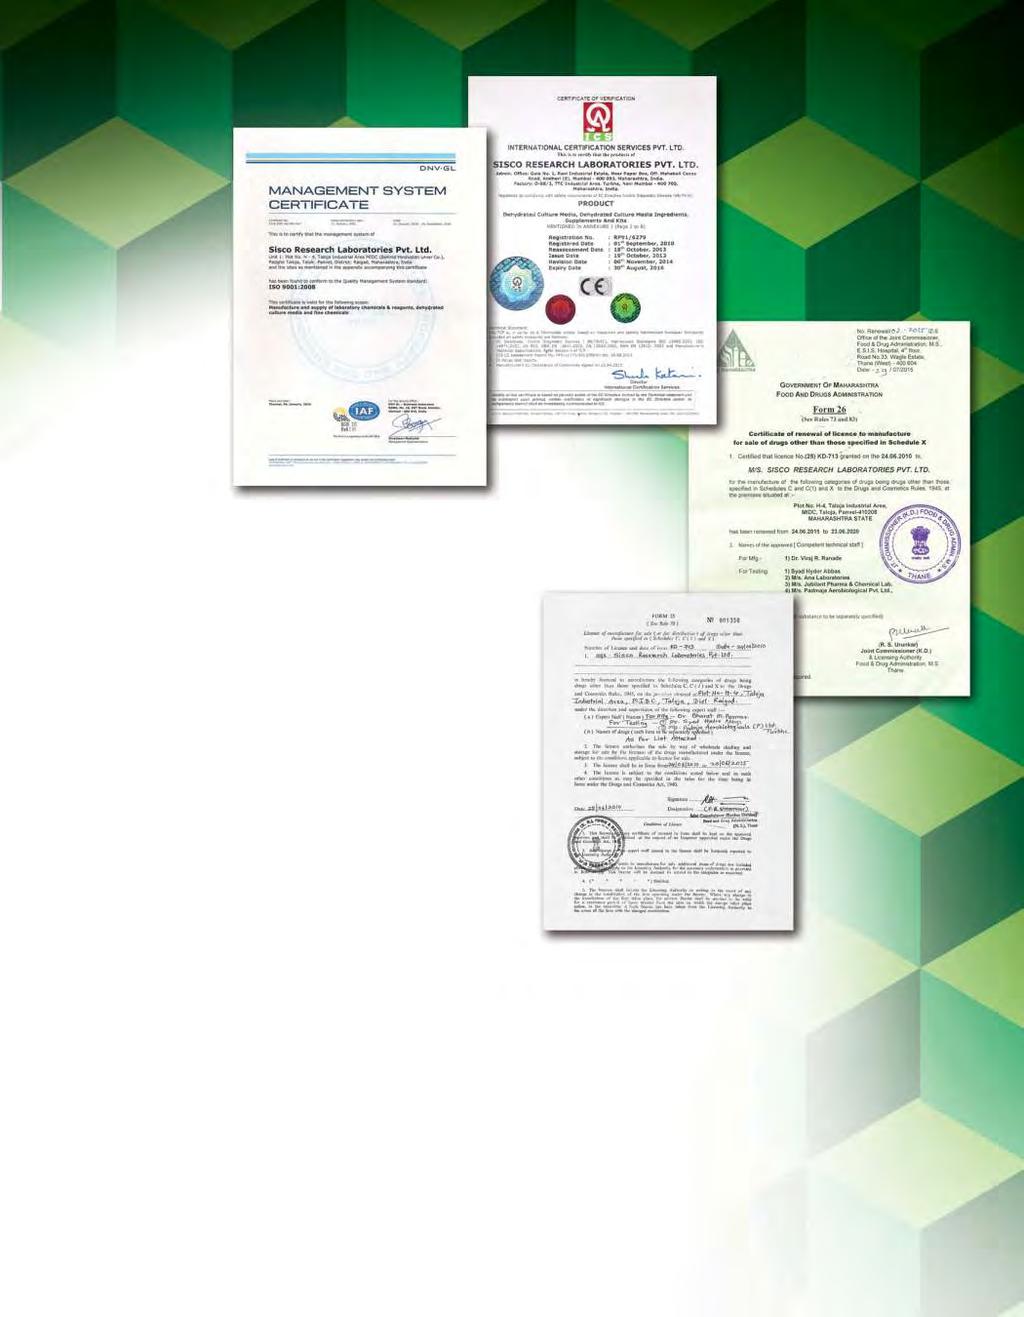 An ISO 9001:2008 Company Quality Policy e, at Sisco Research Laboratories Pvt. Ltd.